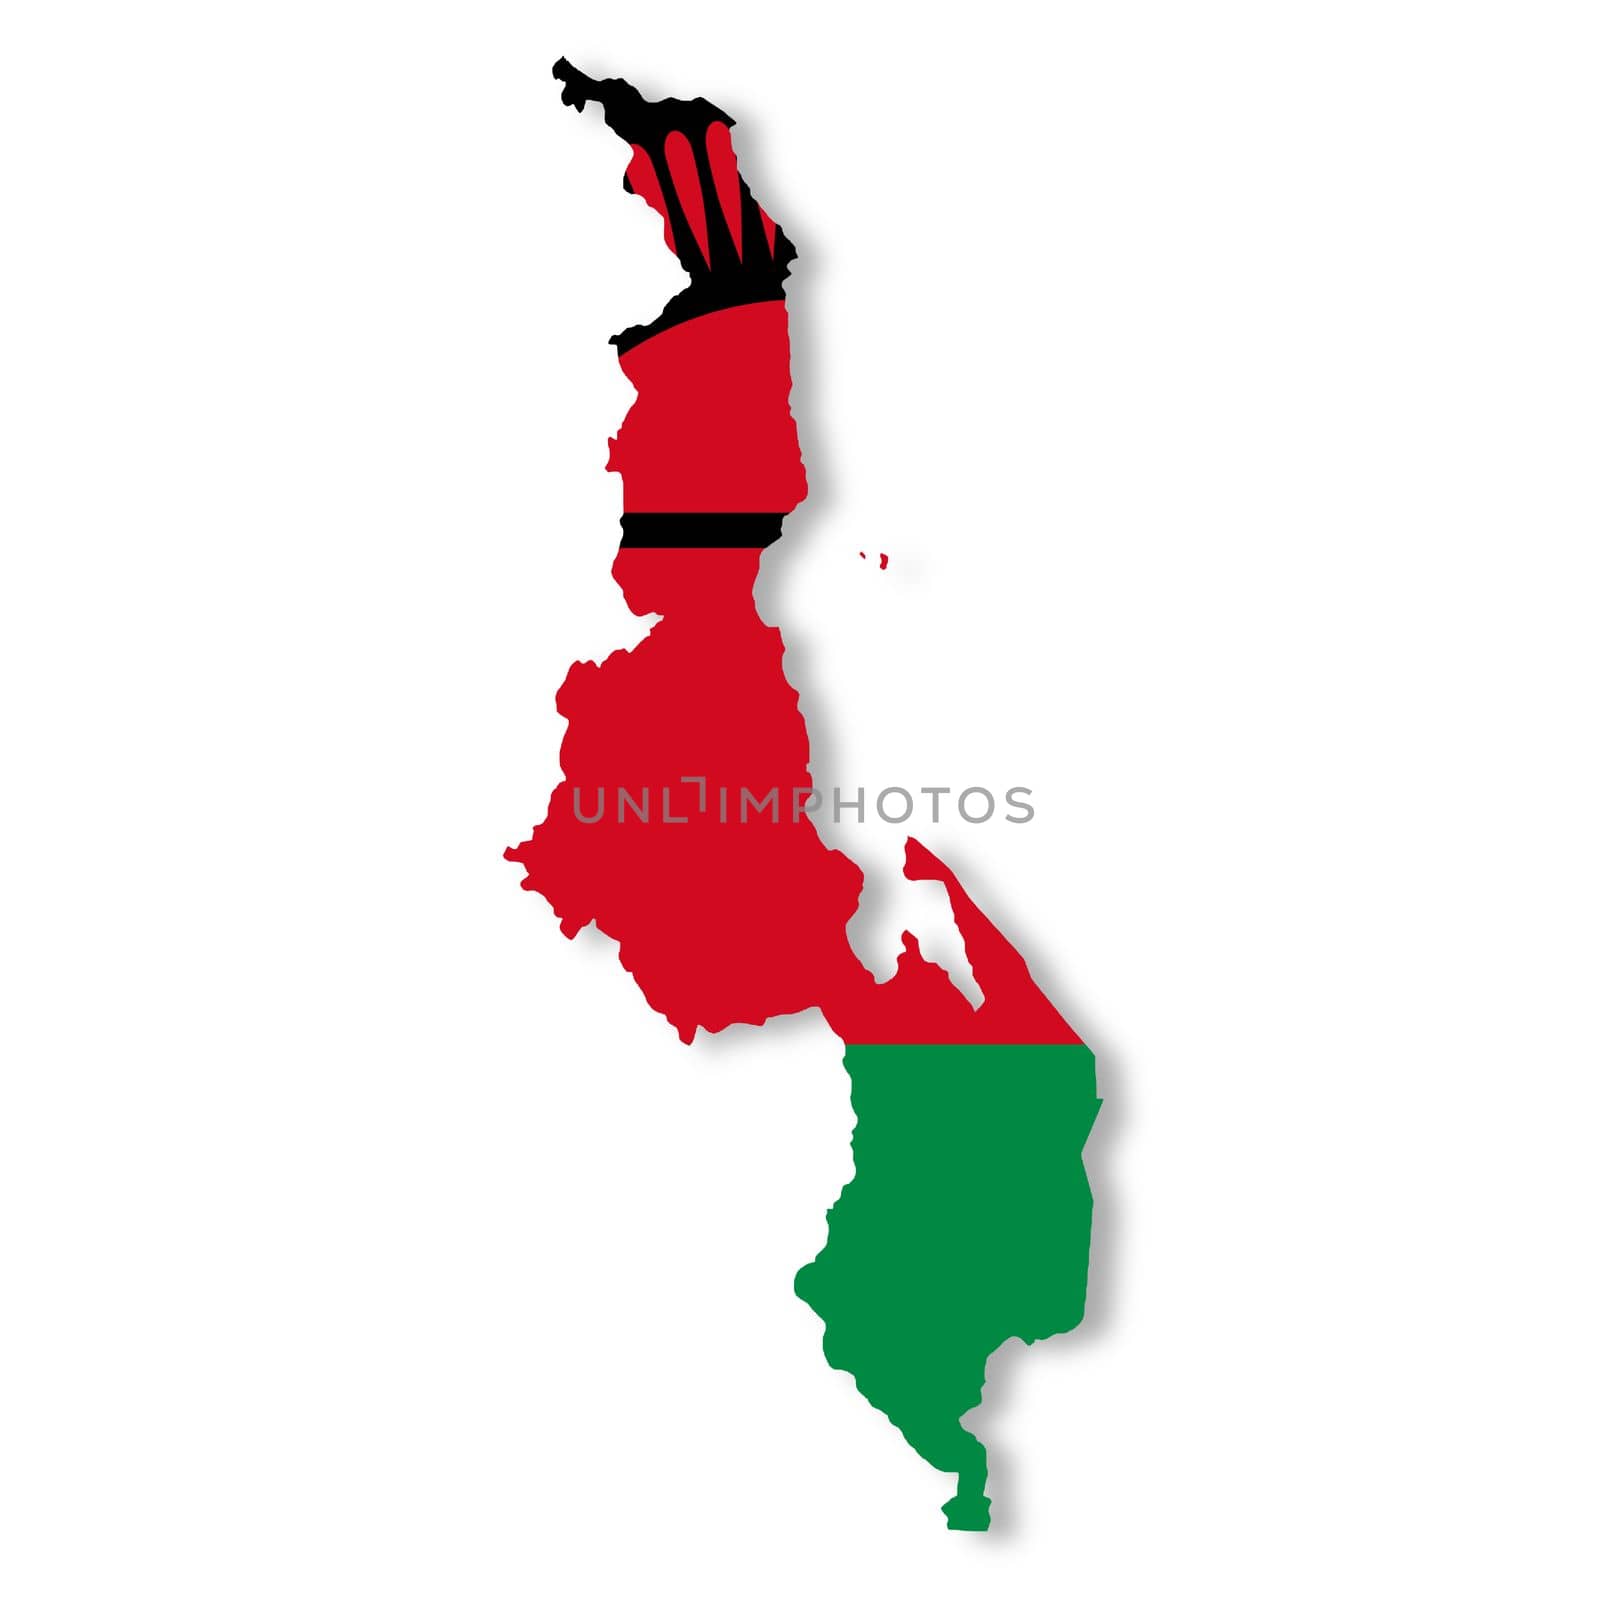 A Malawi flag map with clipping path 3d illustration by VivacityImages